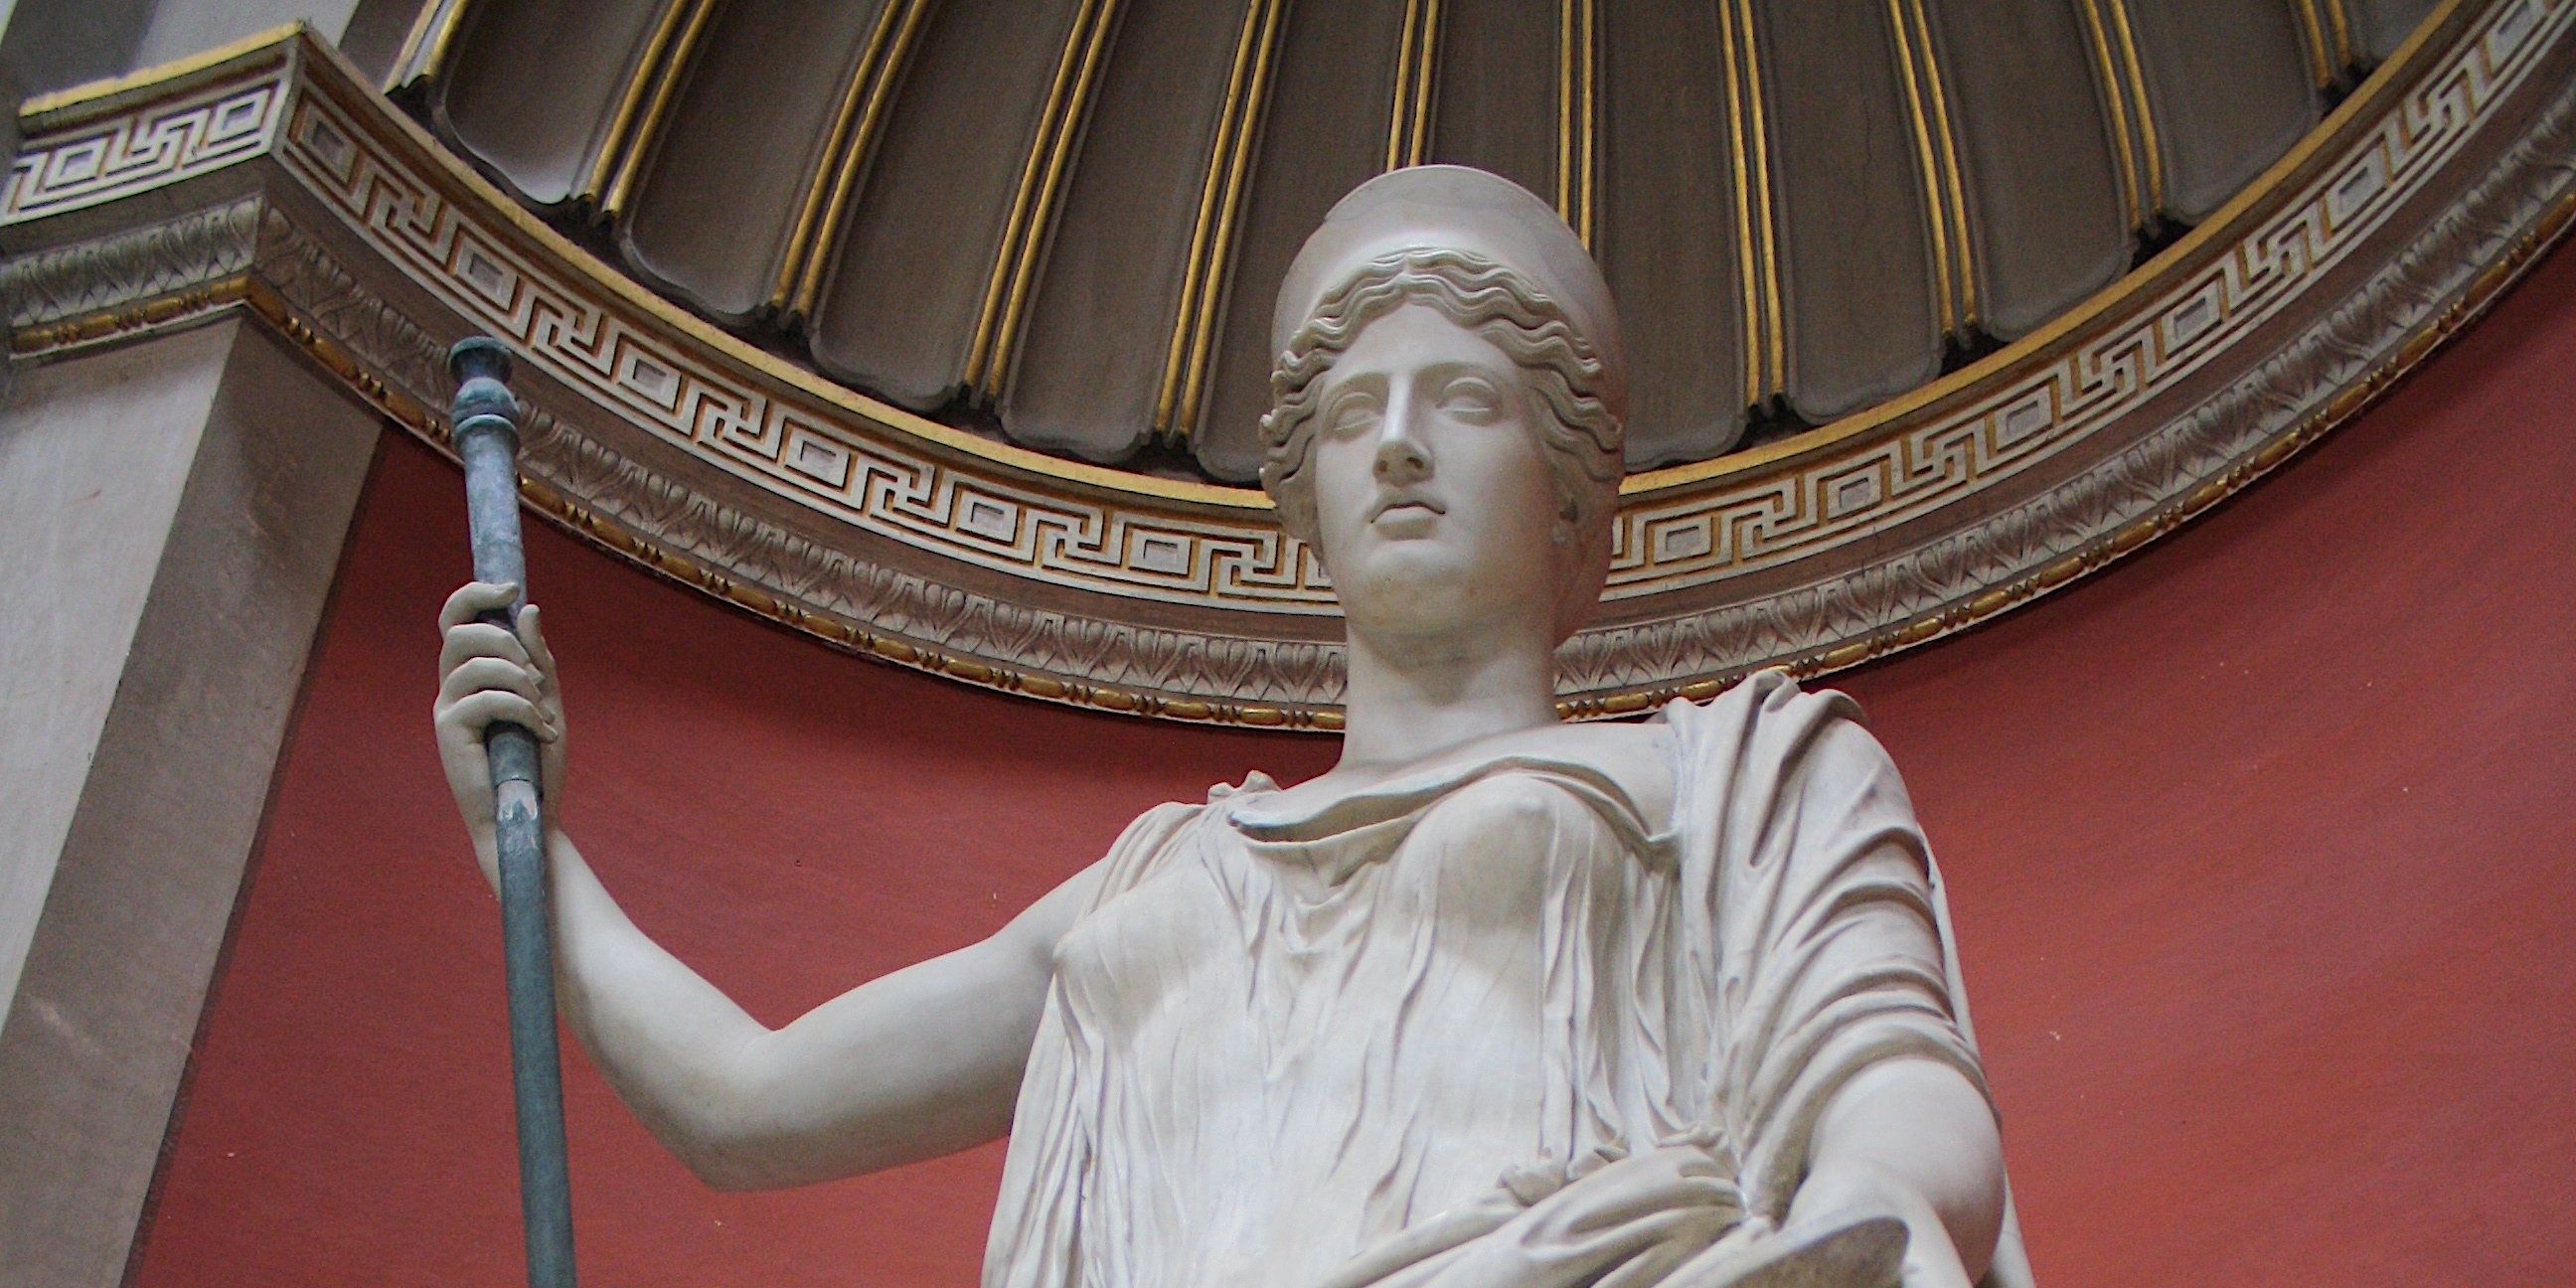 A statue of Hera holding a sceptre